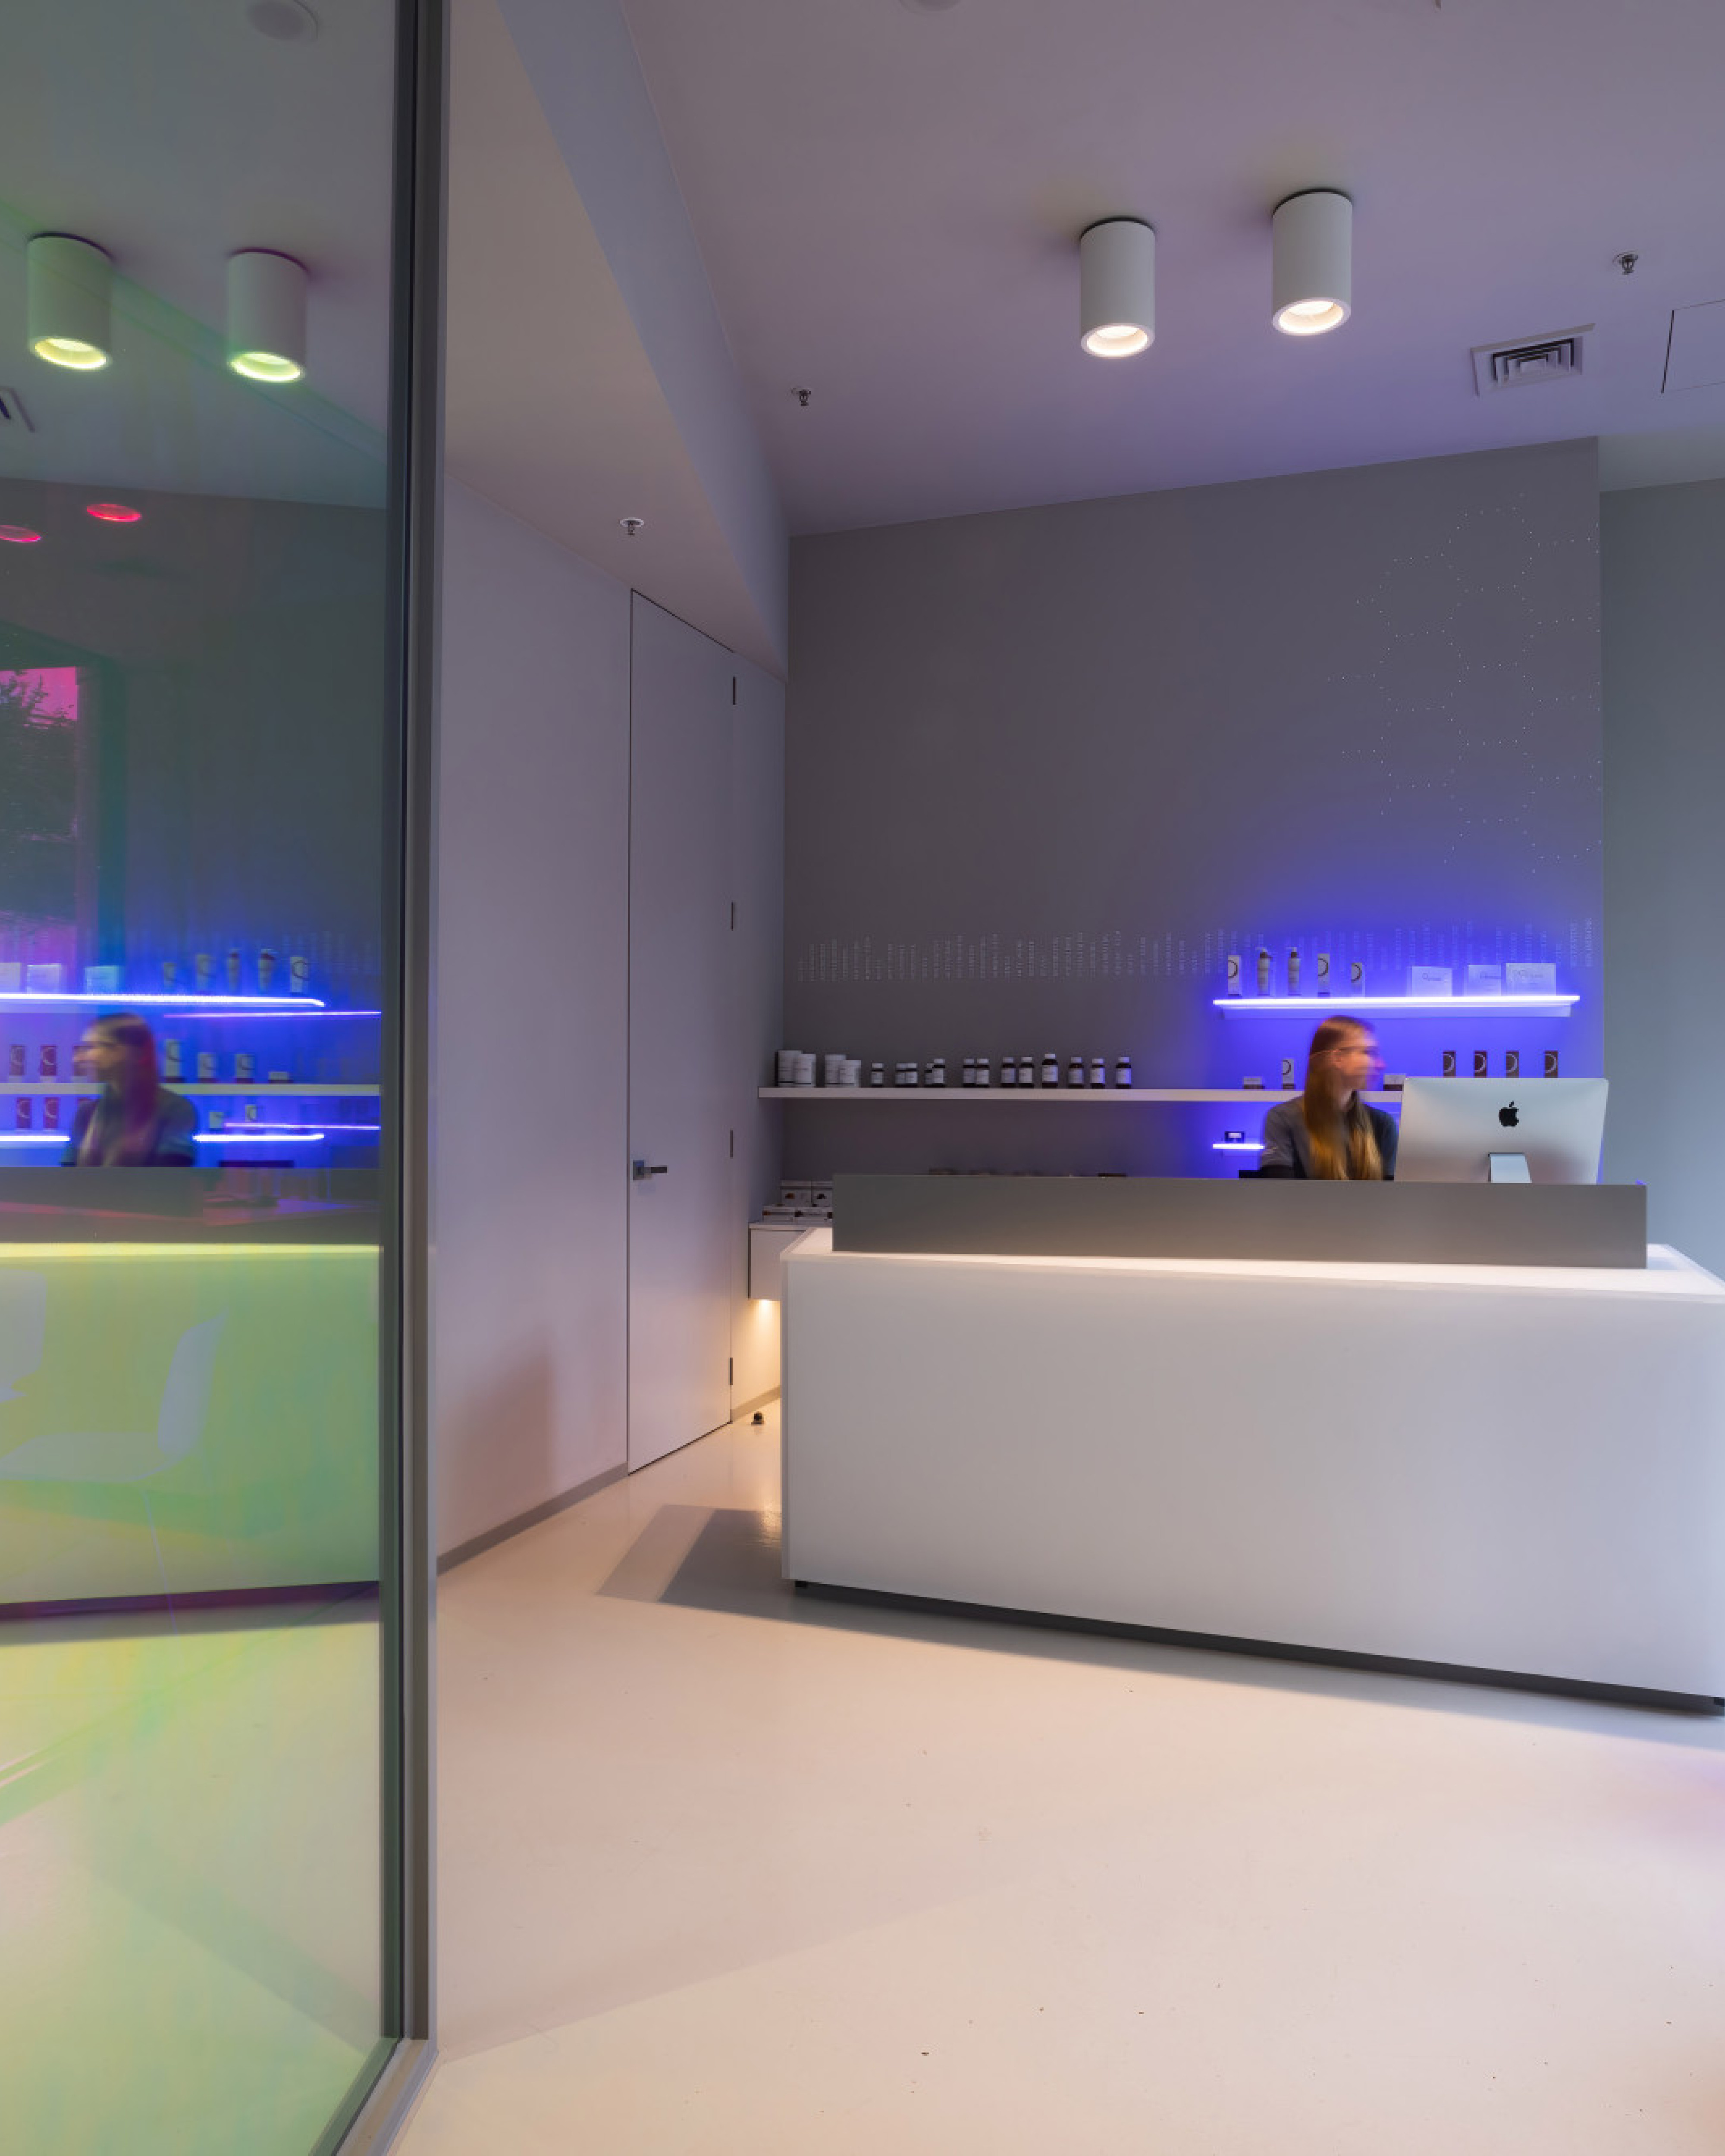 A friendly team member awaits you in reception at Alchemy Cryo